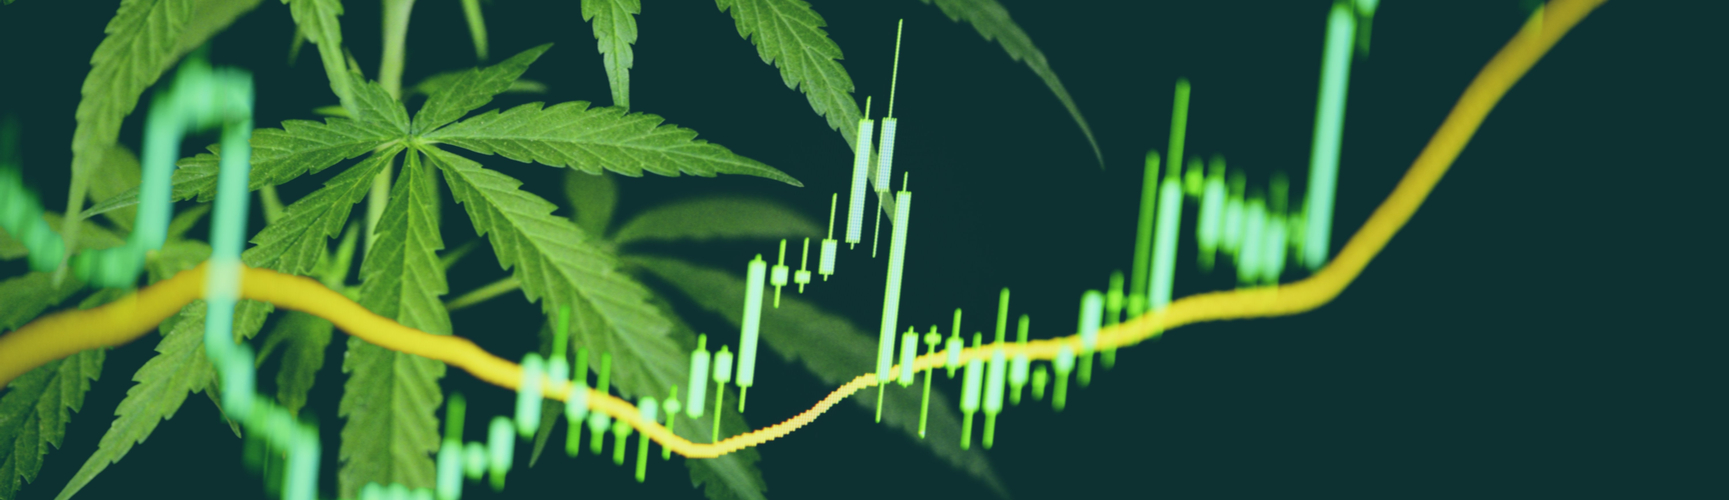 Cannabis Market and Research Trends